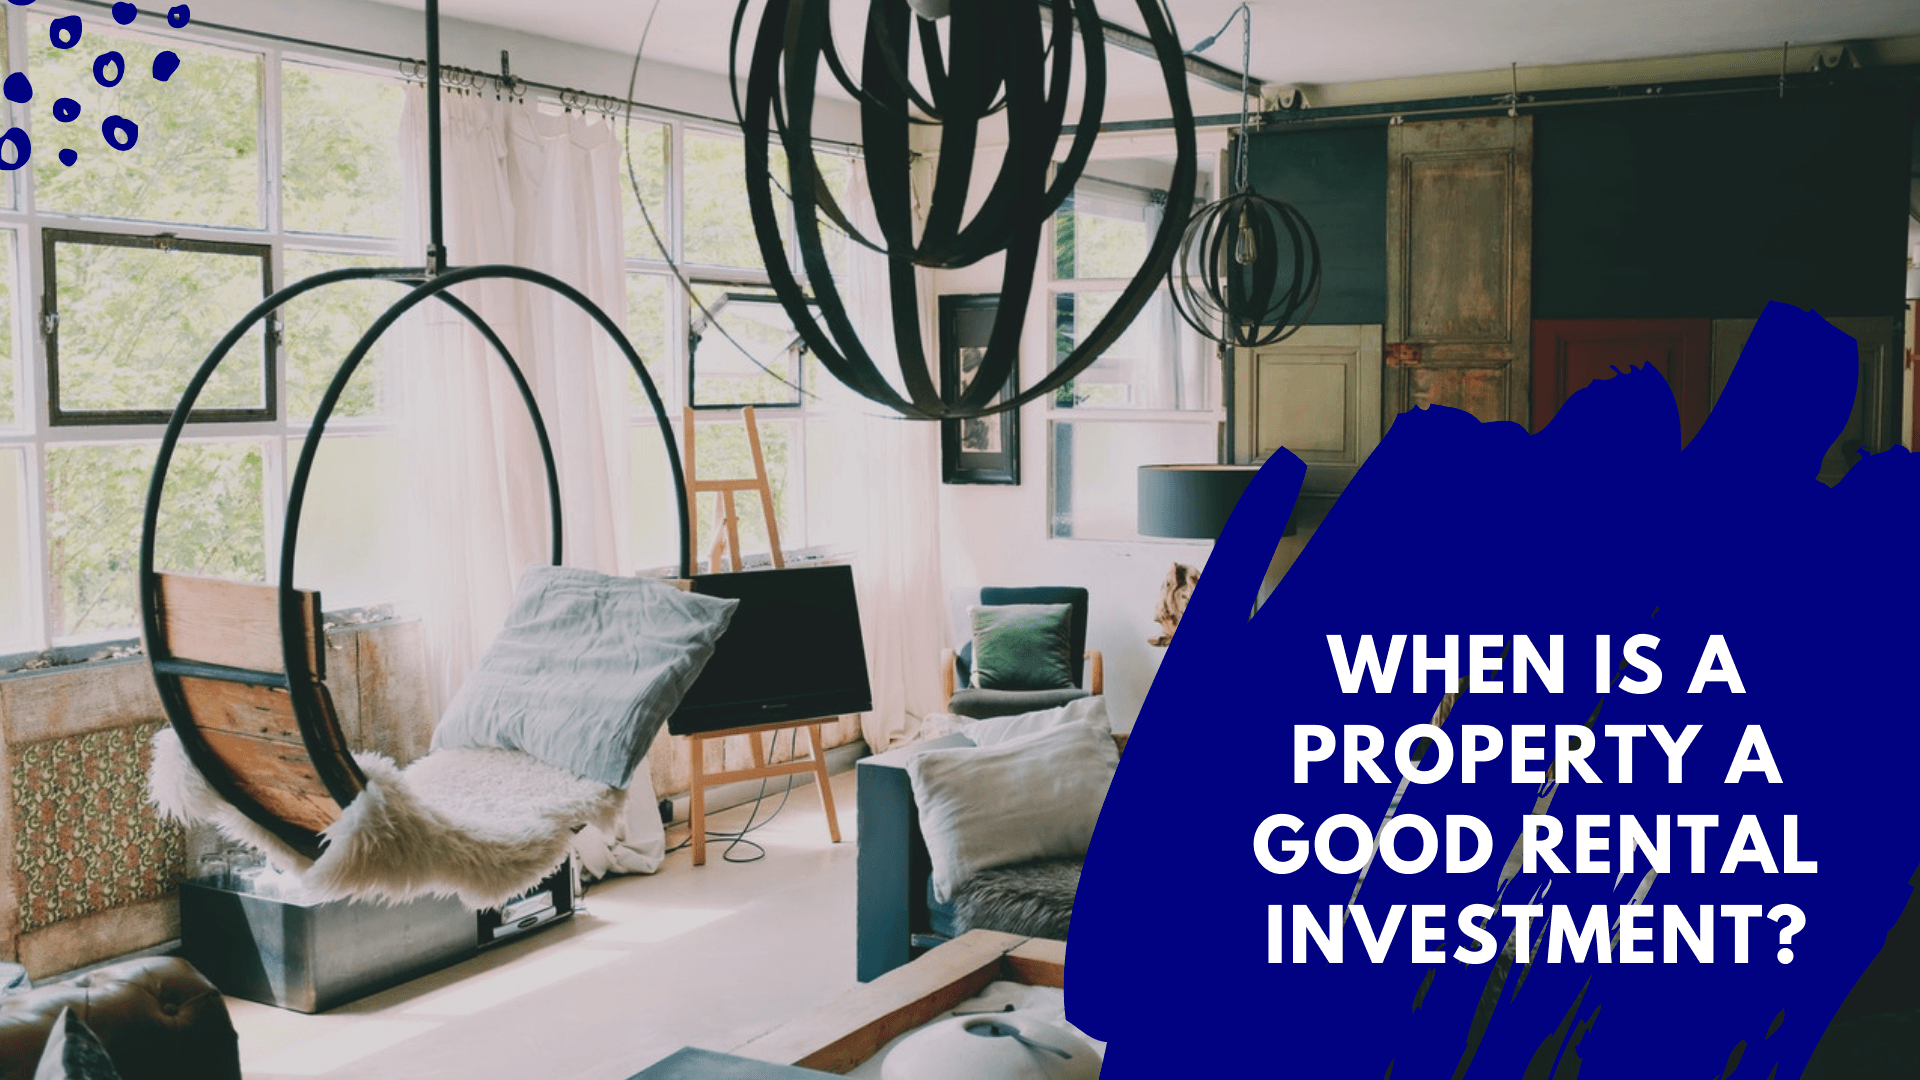 How Do I Know if a Property is a Good Rental Investment? - article banner